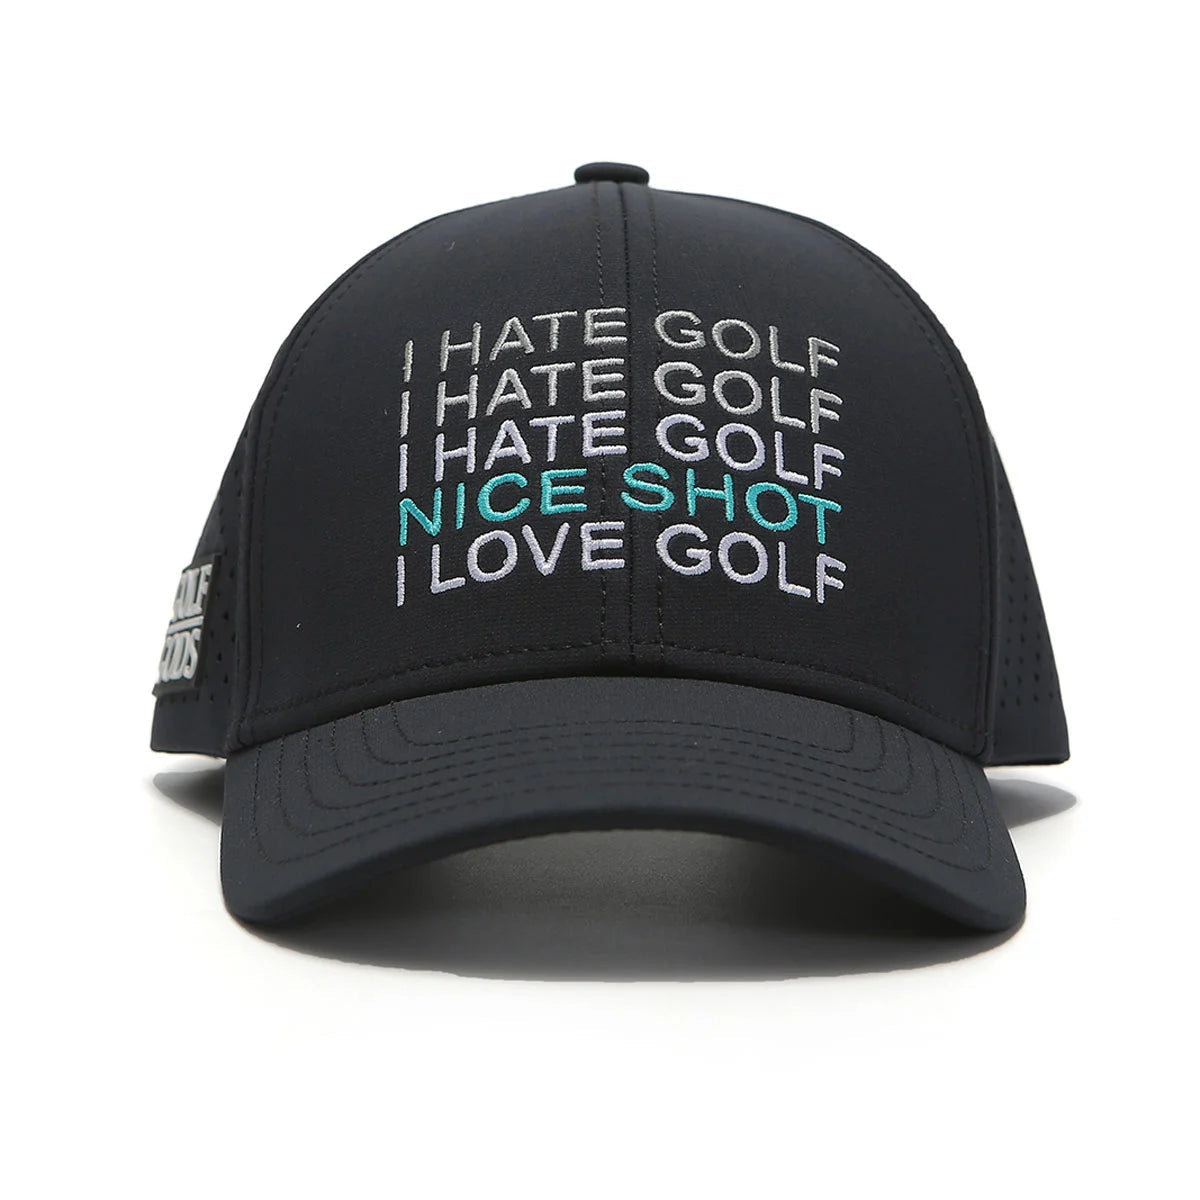 GOLF GODS Tour Pro I Hate Golf Hat in Black with Curved Brim